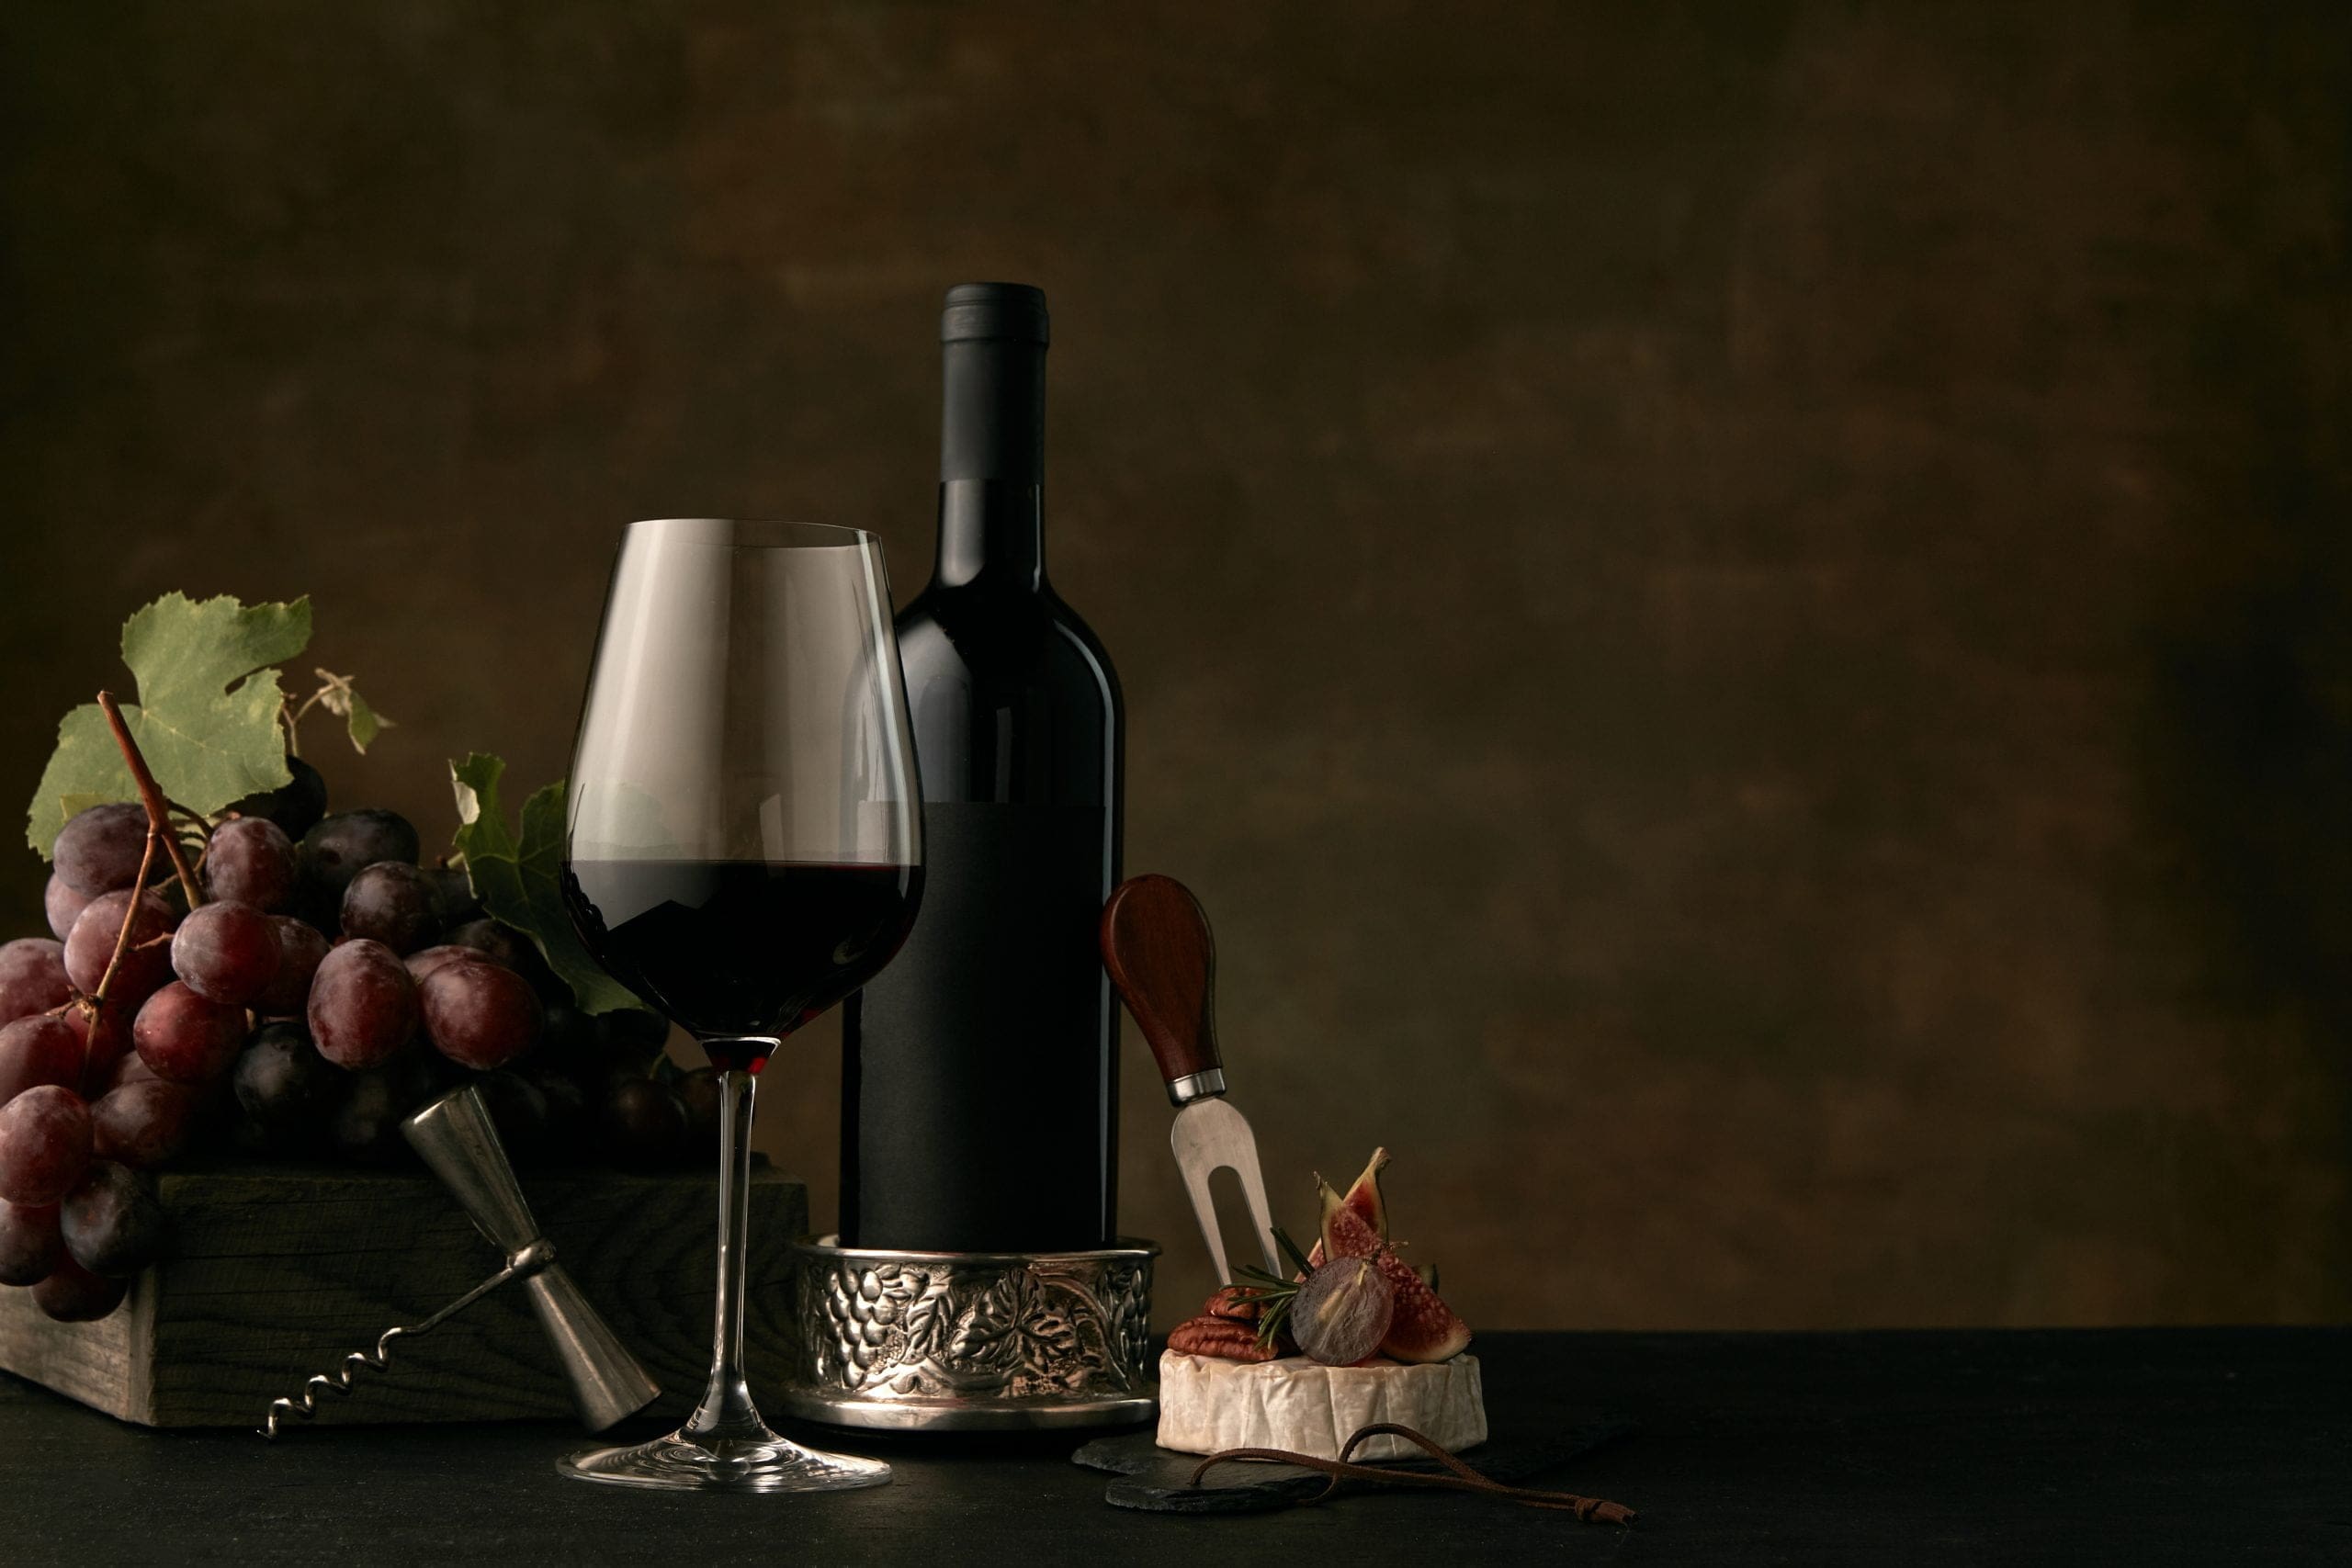 Wine bottle and glass with home wine essentials of bottle opener, wine stand, and accessories